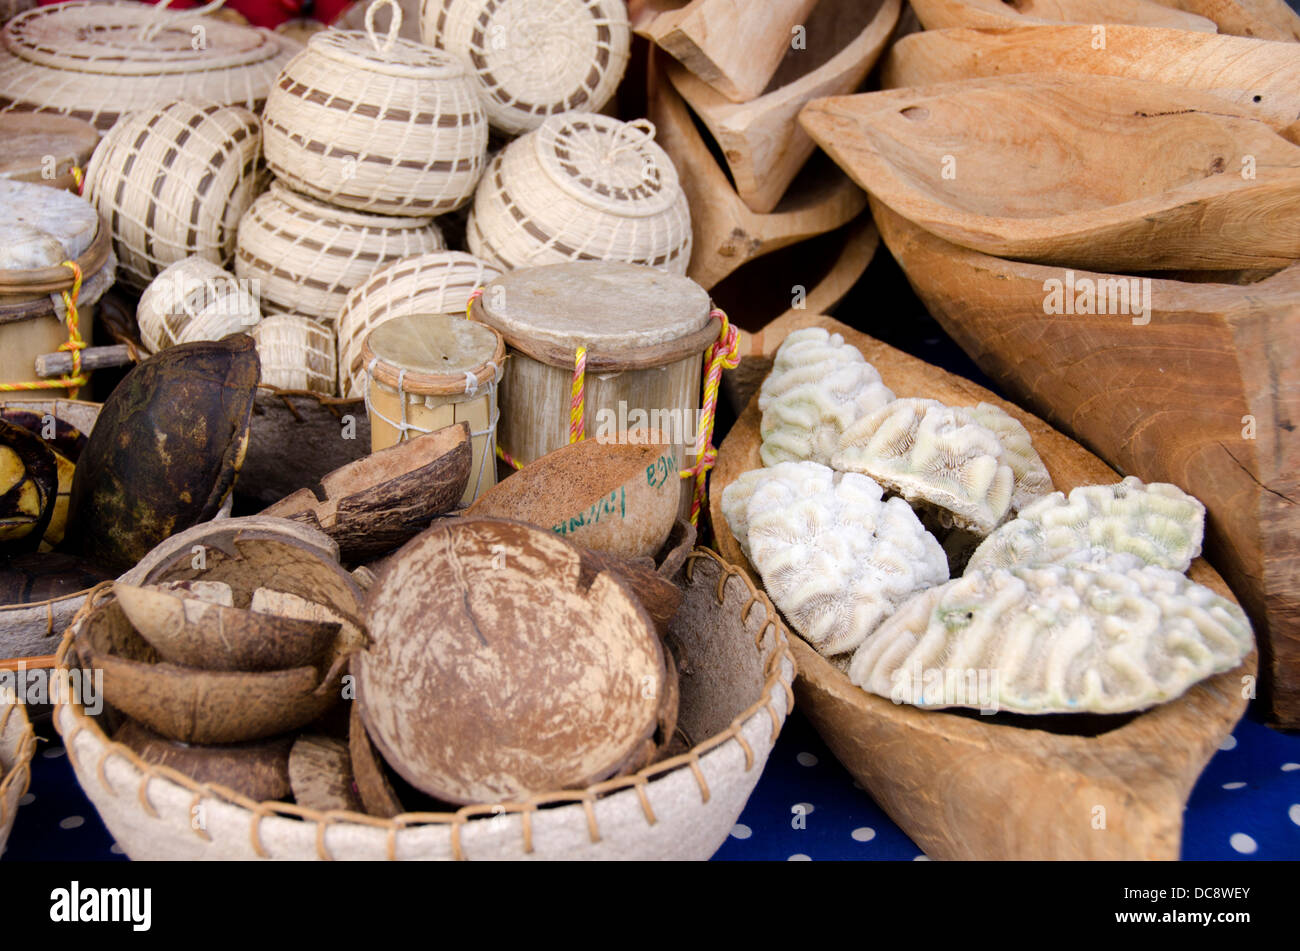 Guatemala, Livingston. Typical souvenir stand with hand woven baskets, hand carve wooden canoes and sea coral. Stock Photo